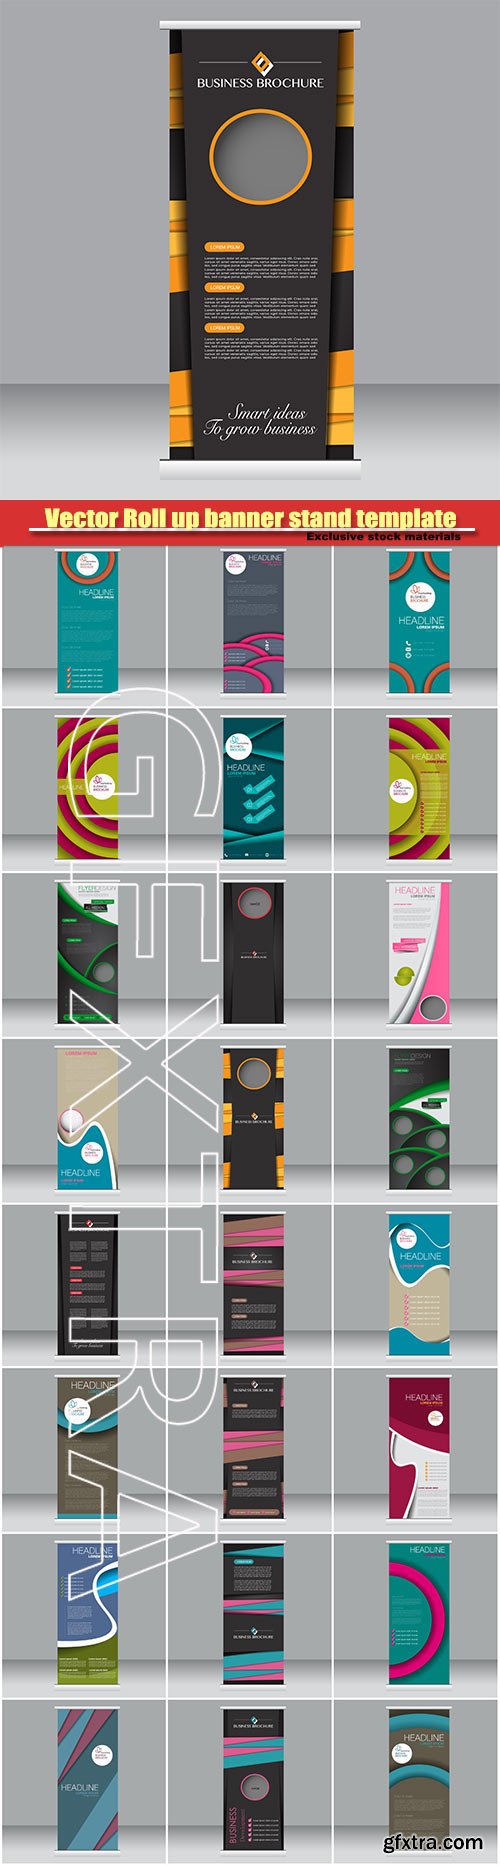 Vector Roll Up Banner, Stand Template, Abstract Background for Design, Business, Education, Advertisement #5, 25xEPS